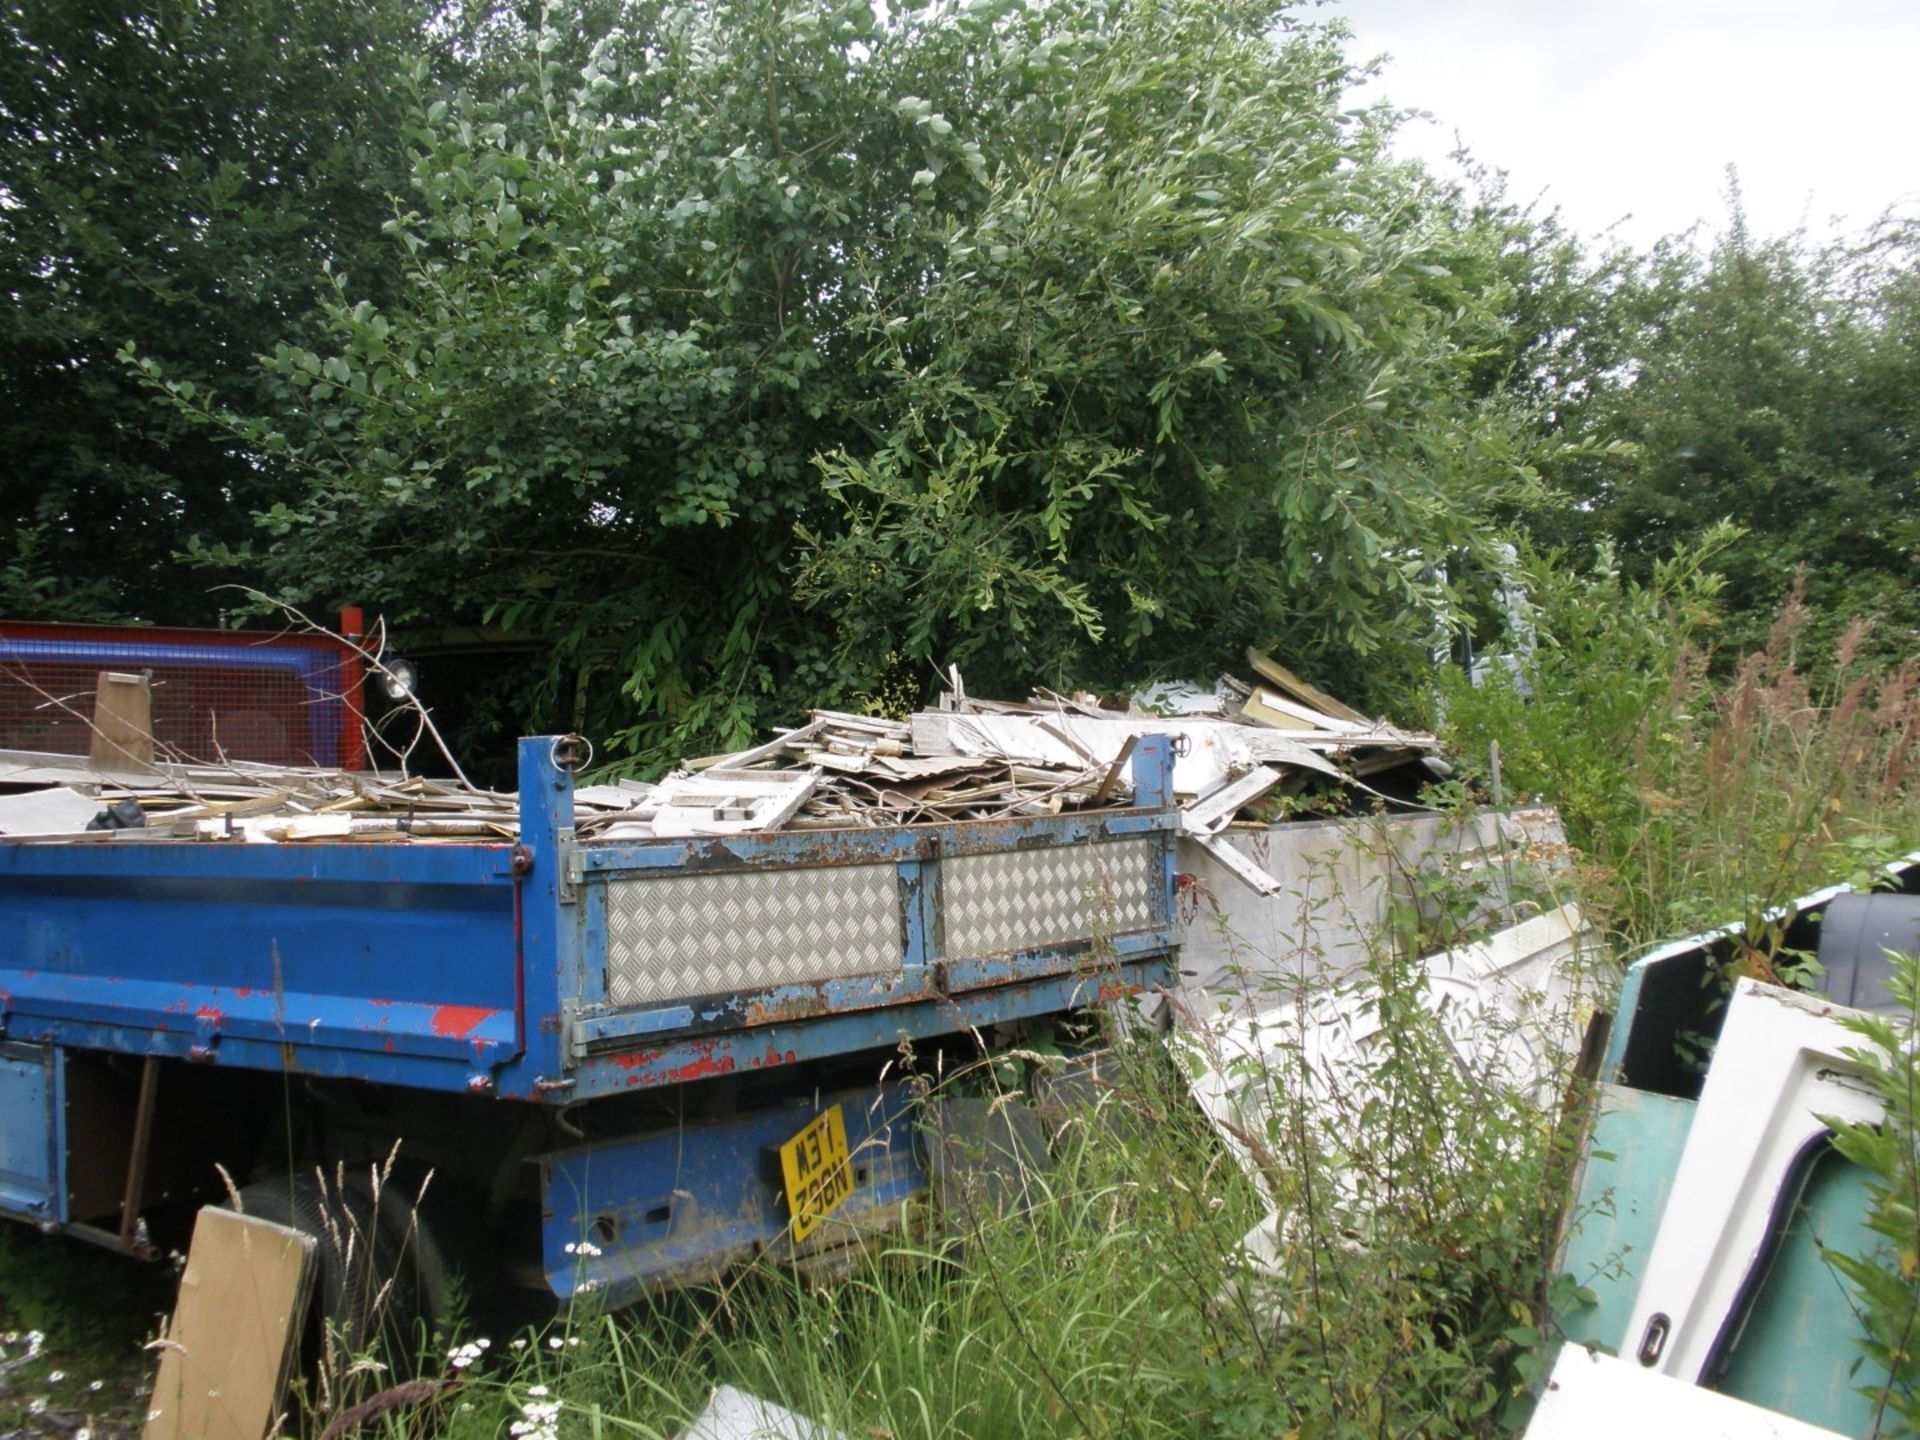 The Residual Scrap Vehicles on site together with other scrap hidden in the undergrowth. To include - Image 4 of 10